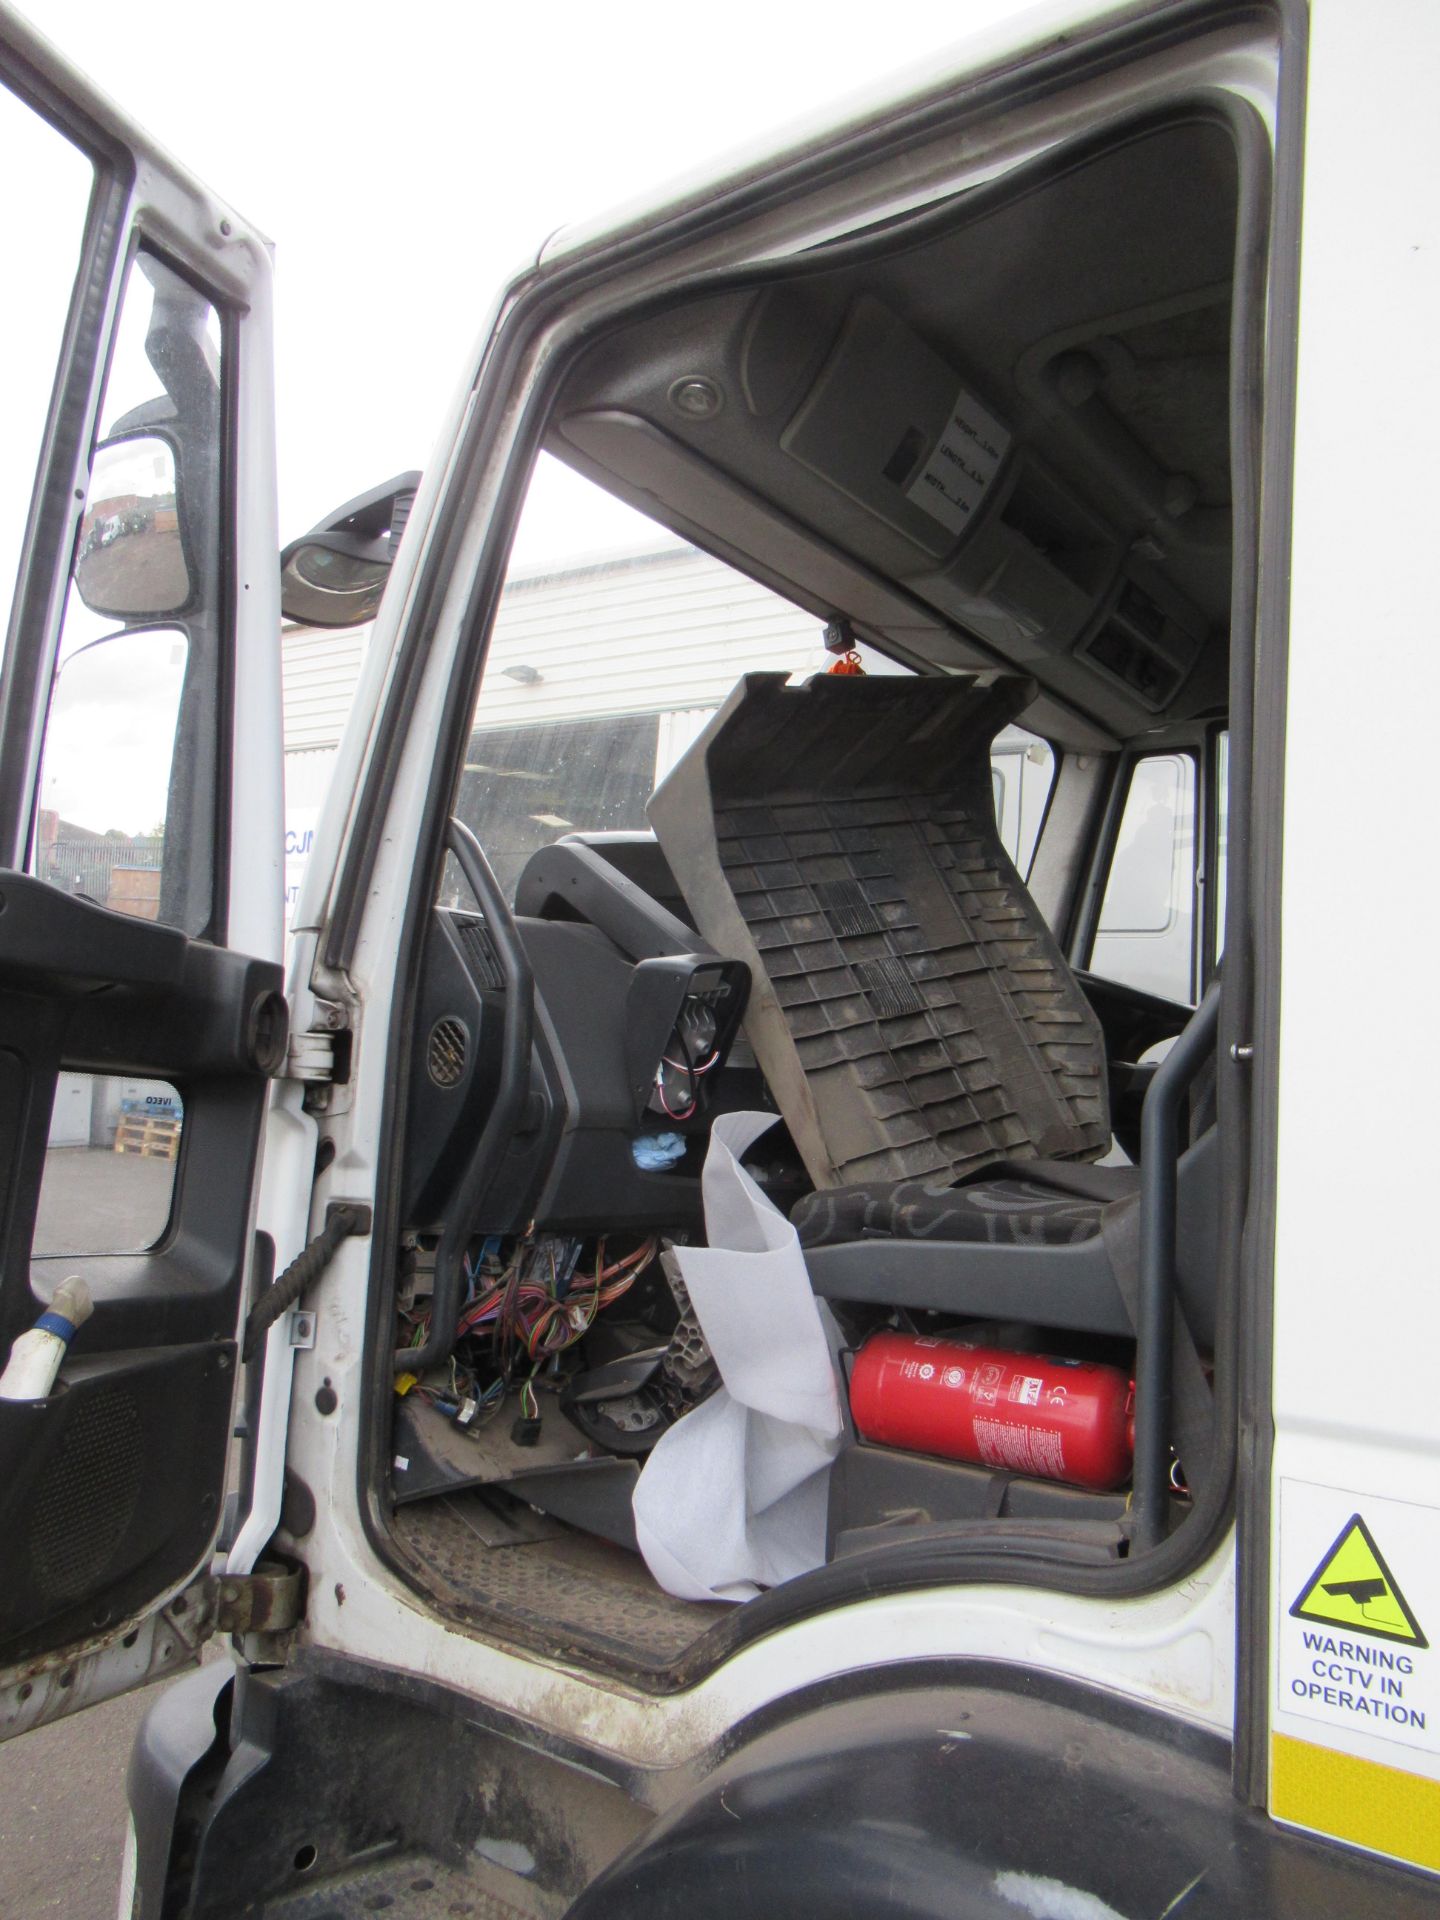 2013 WHITE IVECO EUROCARGO (MY 2008) Refuse Collection Vehicle - Image 11 of 12